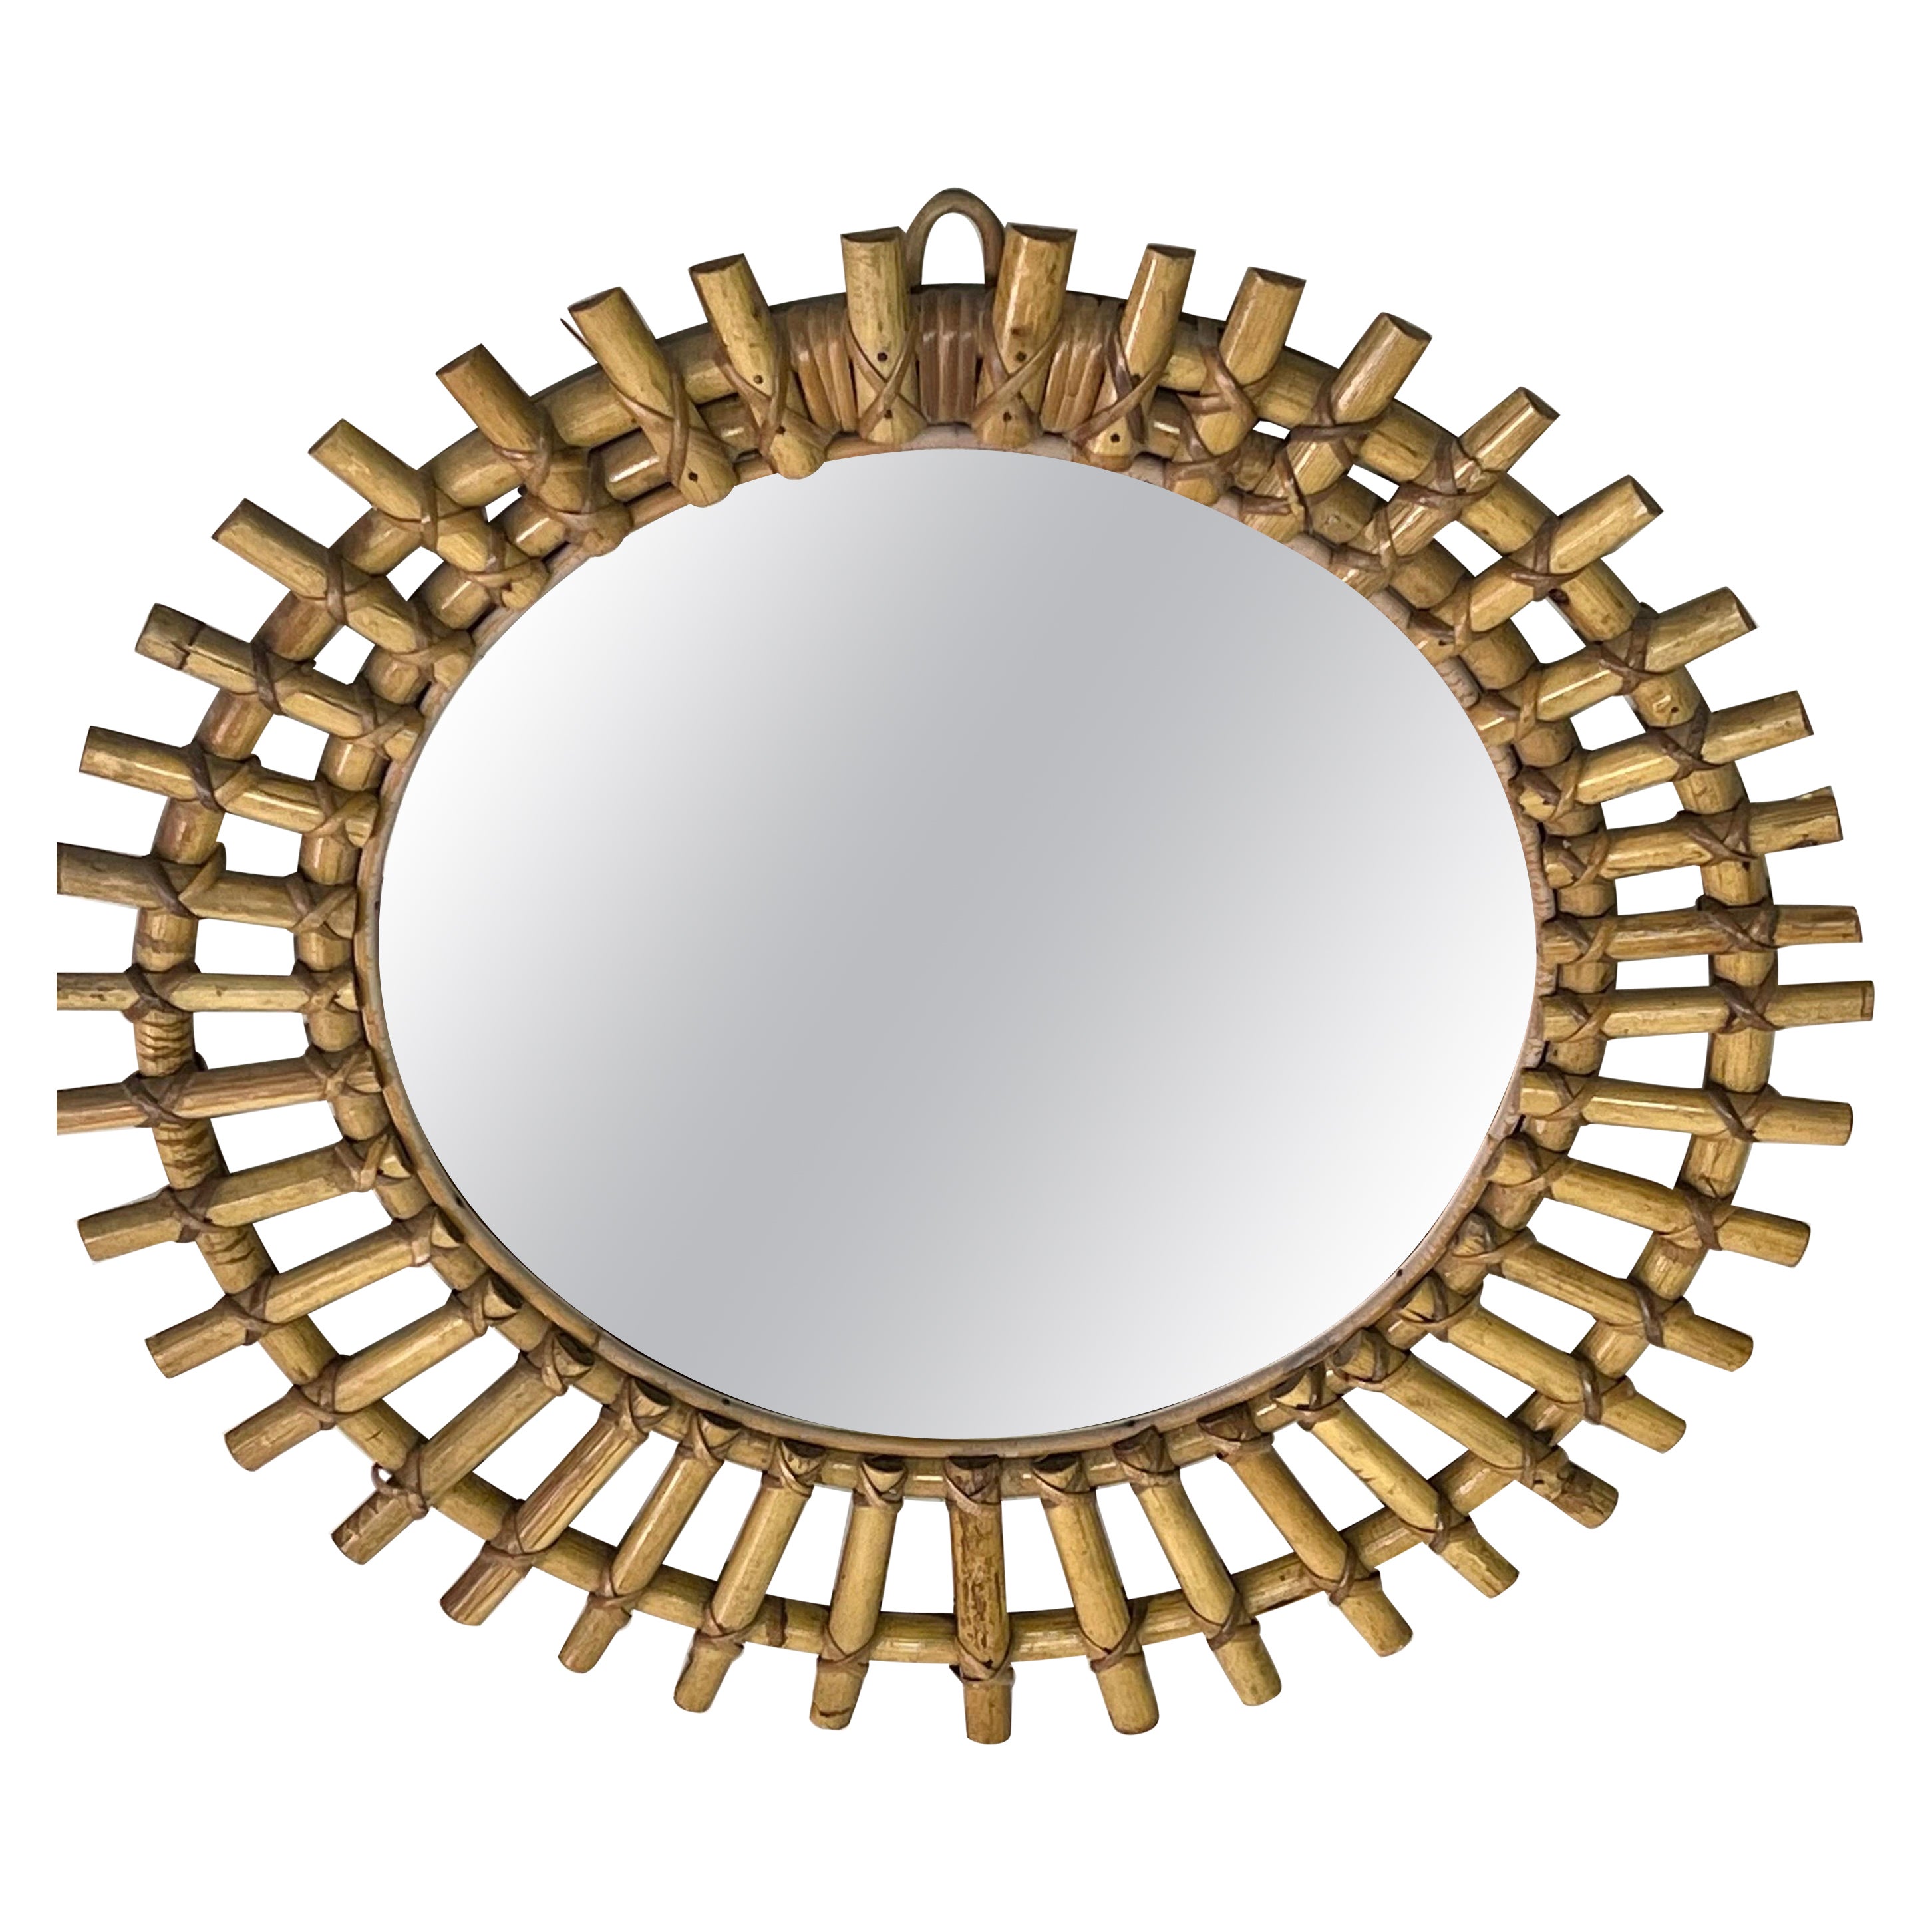 French Mid-Century Modern Neoclassical Bamboo and Rattan Sunburst Mirror, Arbus For Sale